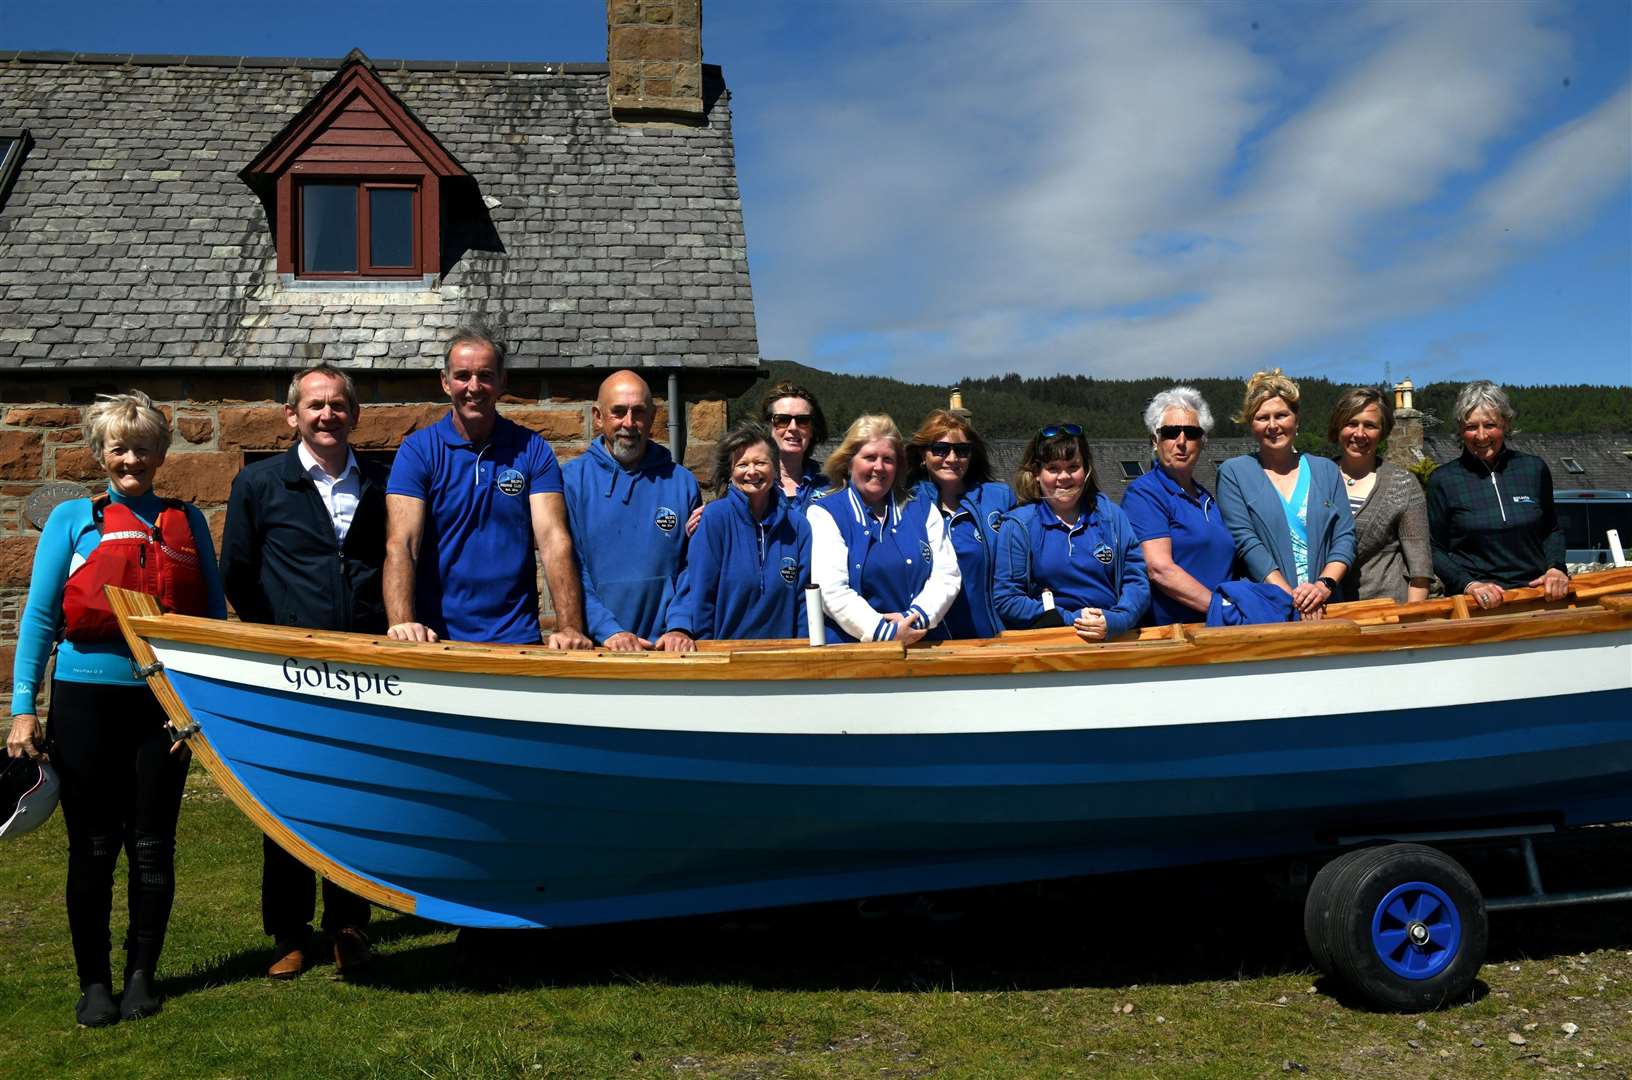 The royal couple spoke to members of Golspie Rowing Club. Picture: James MacKenzie